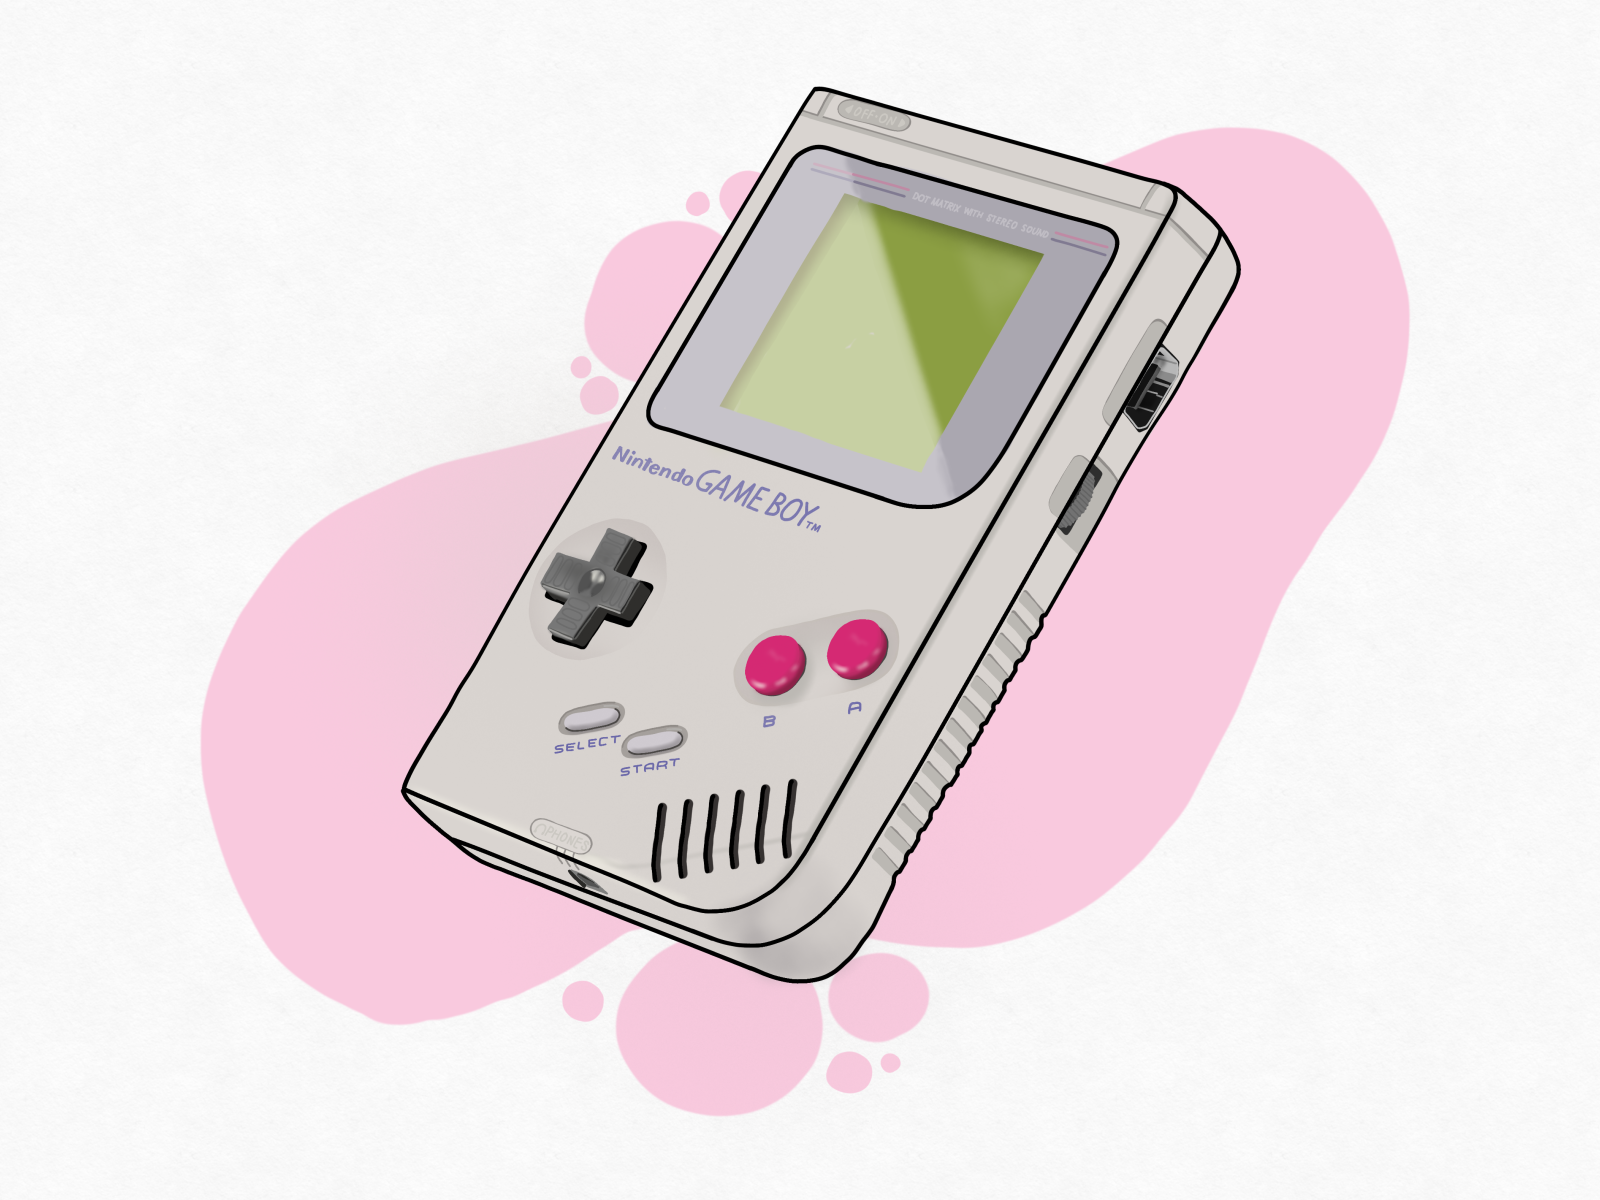 Game Boy by Steven on